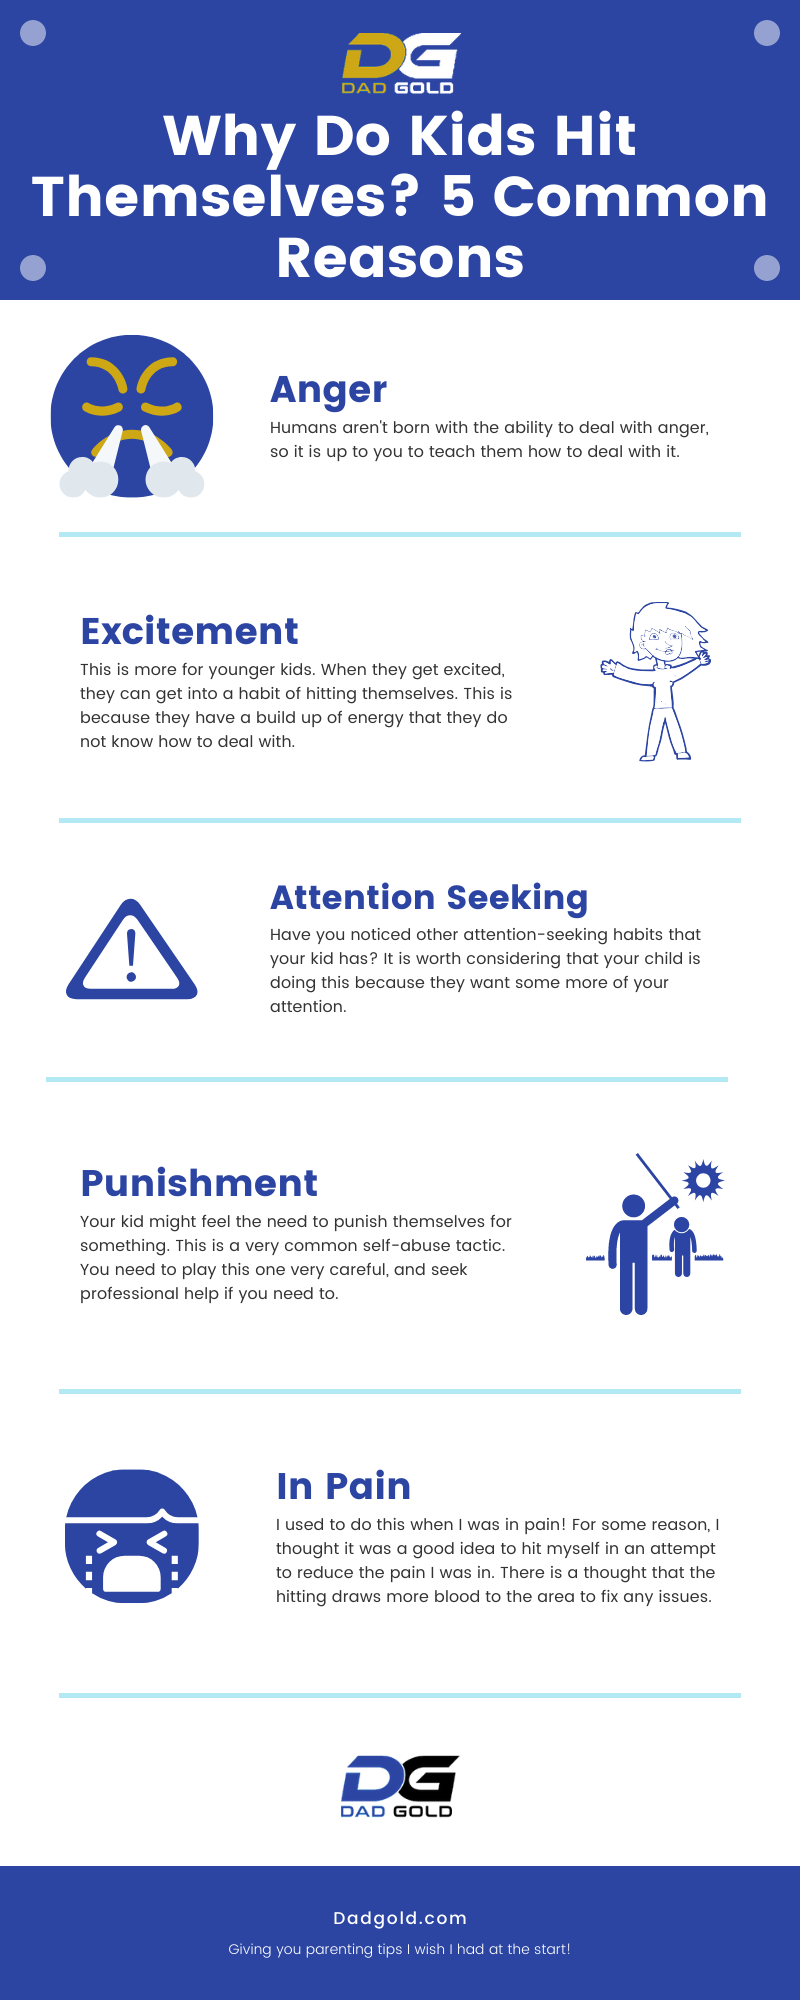 Why Do Kids Hit Themselves? 5 Common Reasons Infographic